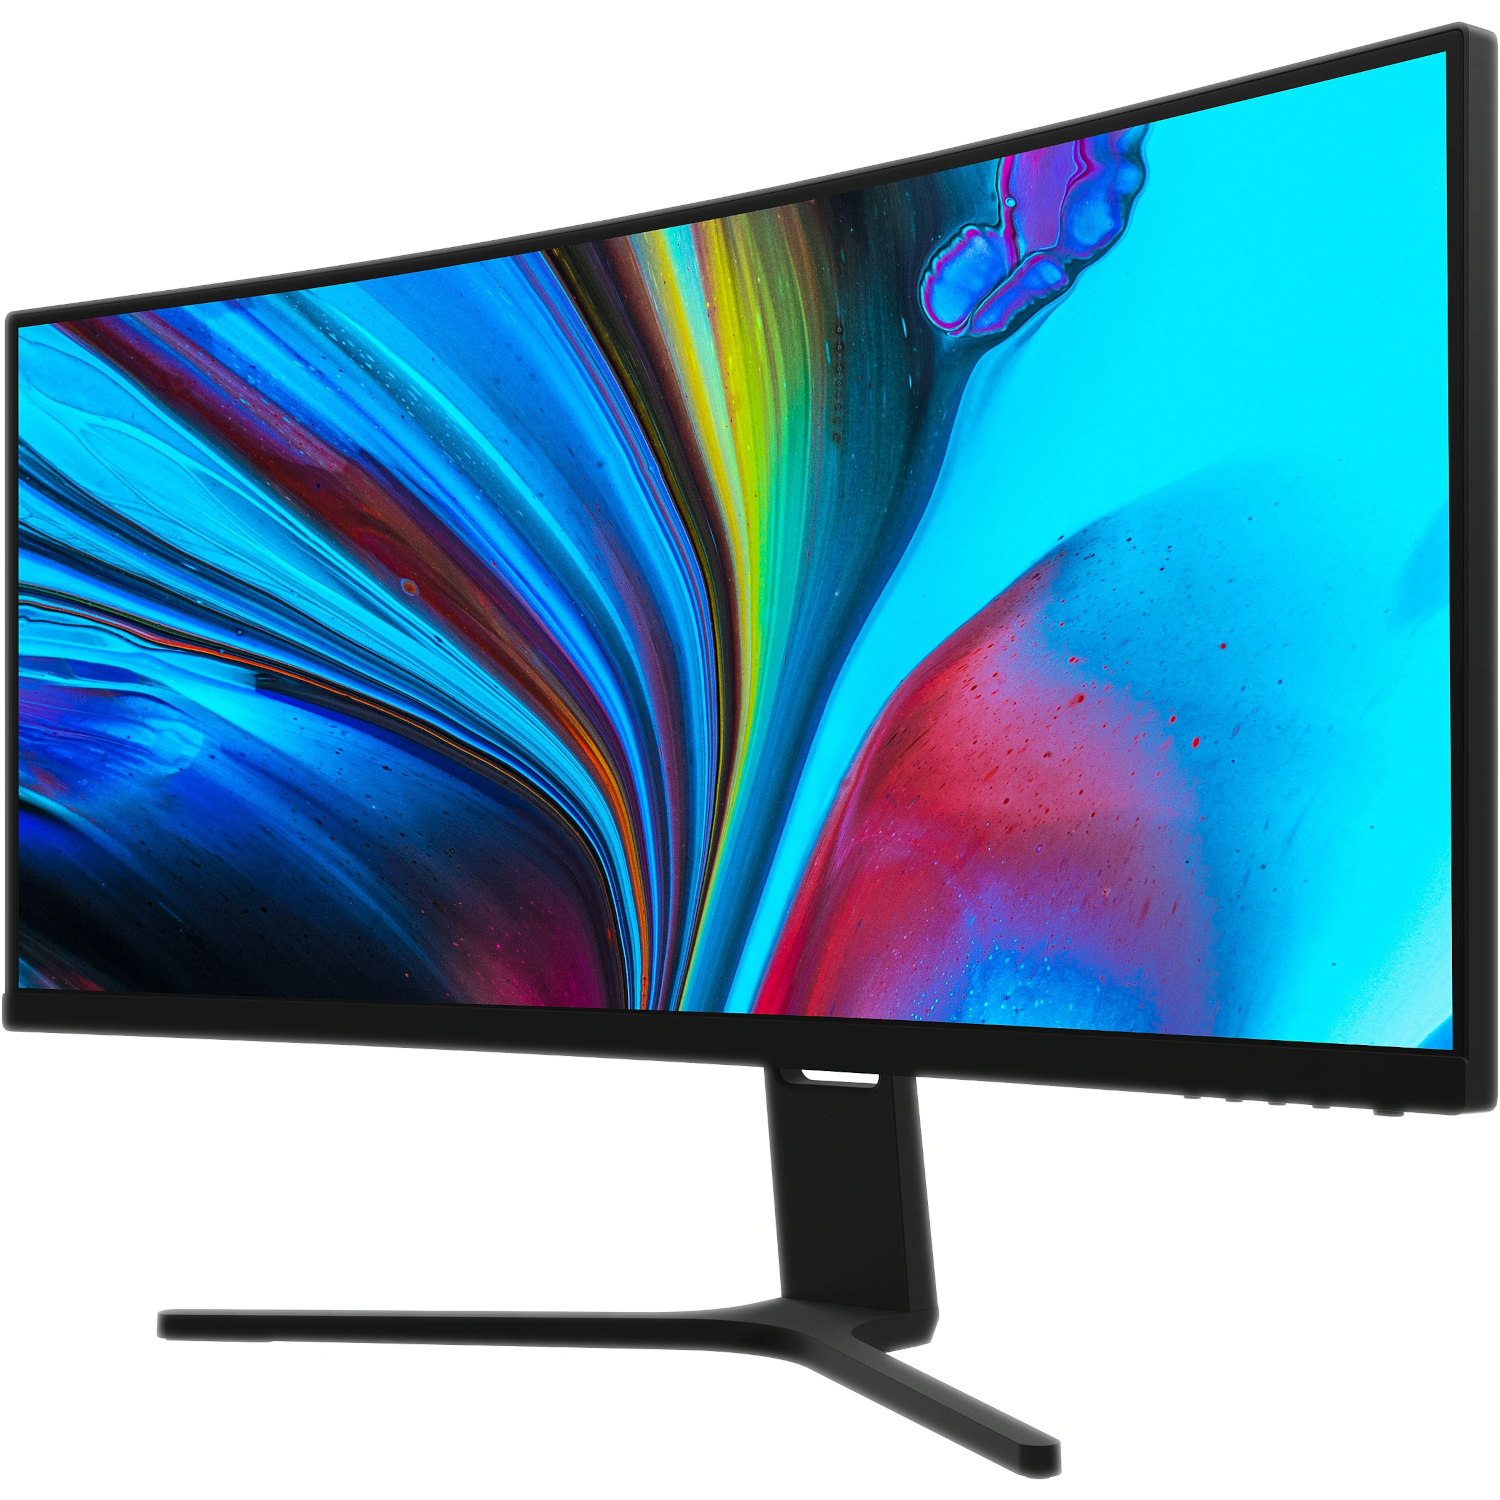 2 xiaomi curved gaming monitor 30